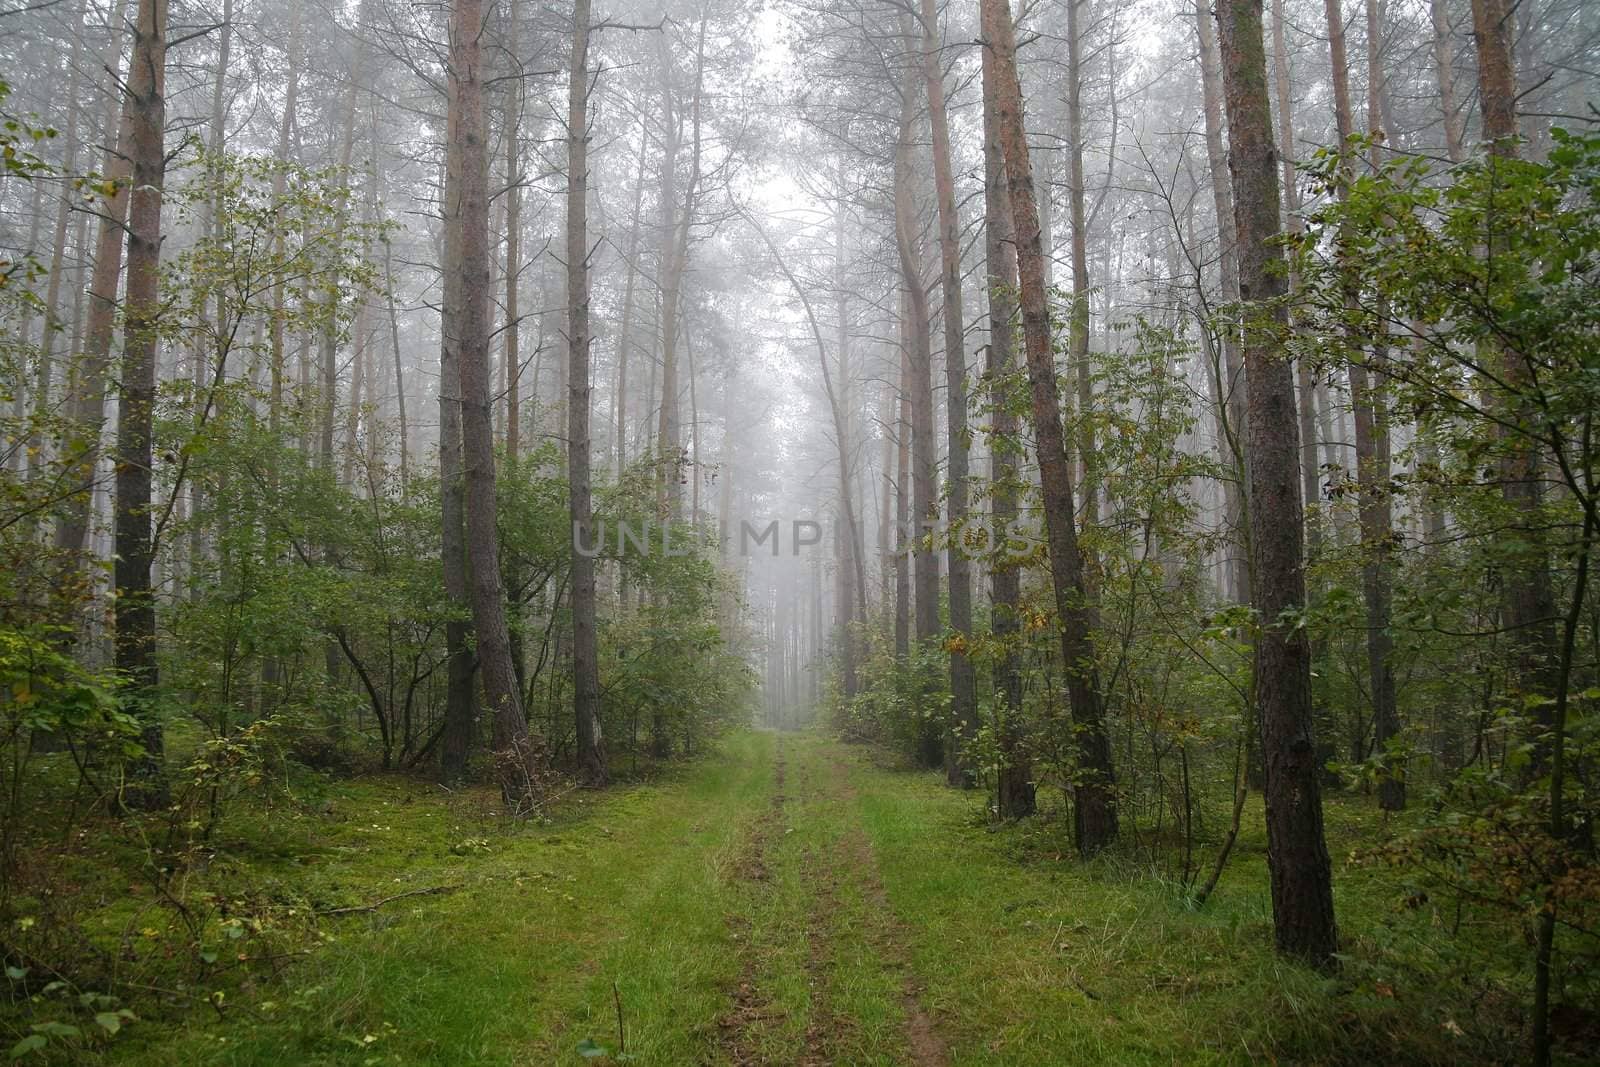 foggy forest in the morning (Poland)